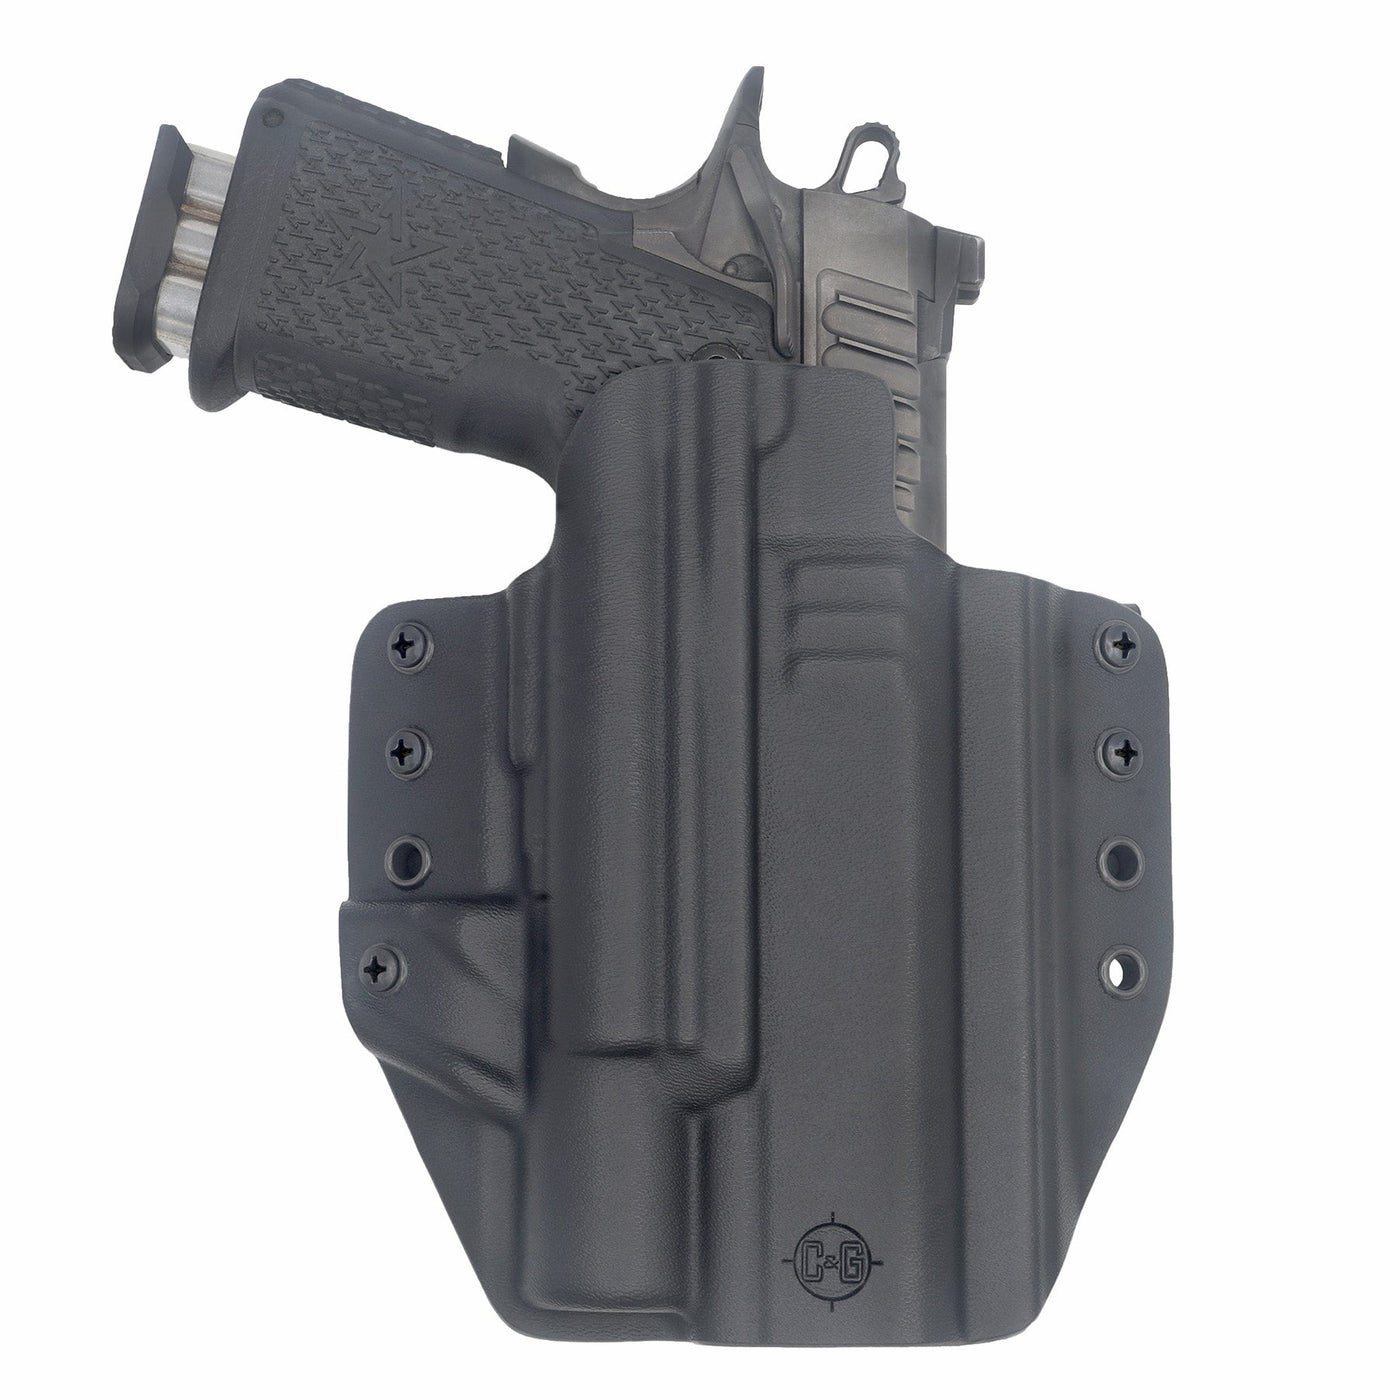 C&G Holsters Quickship OWB Tactical 1911 DS Prodigy Surefire X300 in holstered position